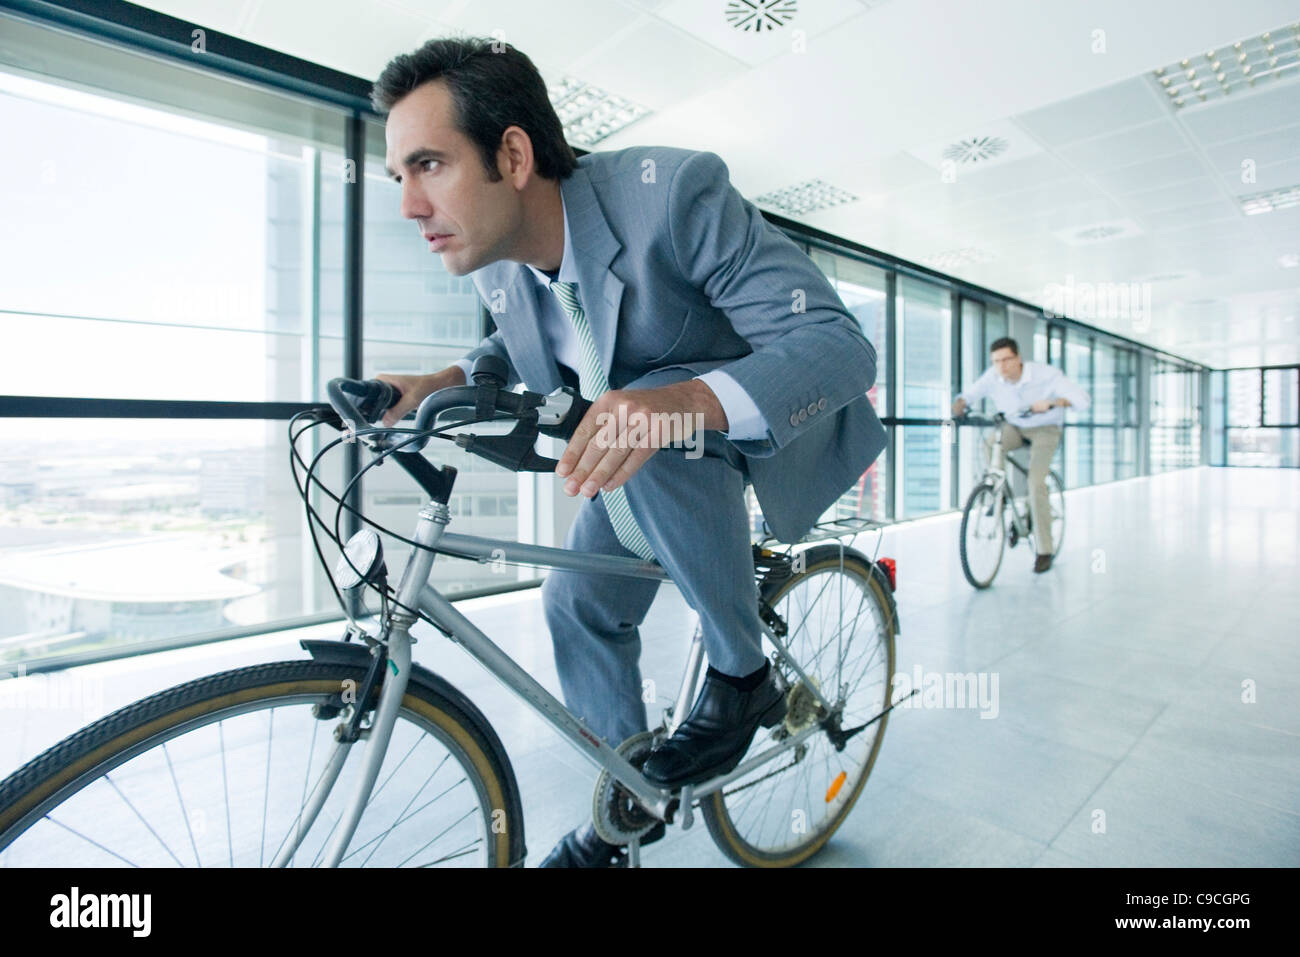 Businessmen riding bicycles indoors Stock Photo